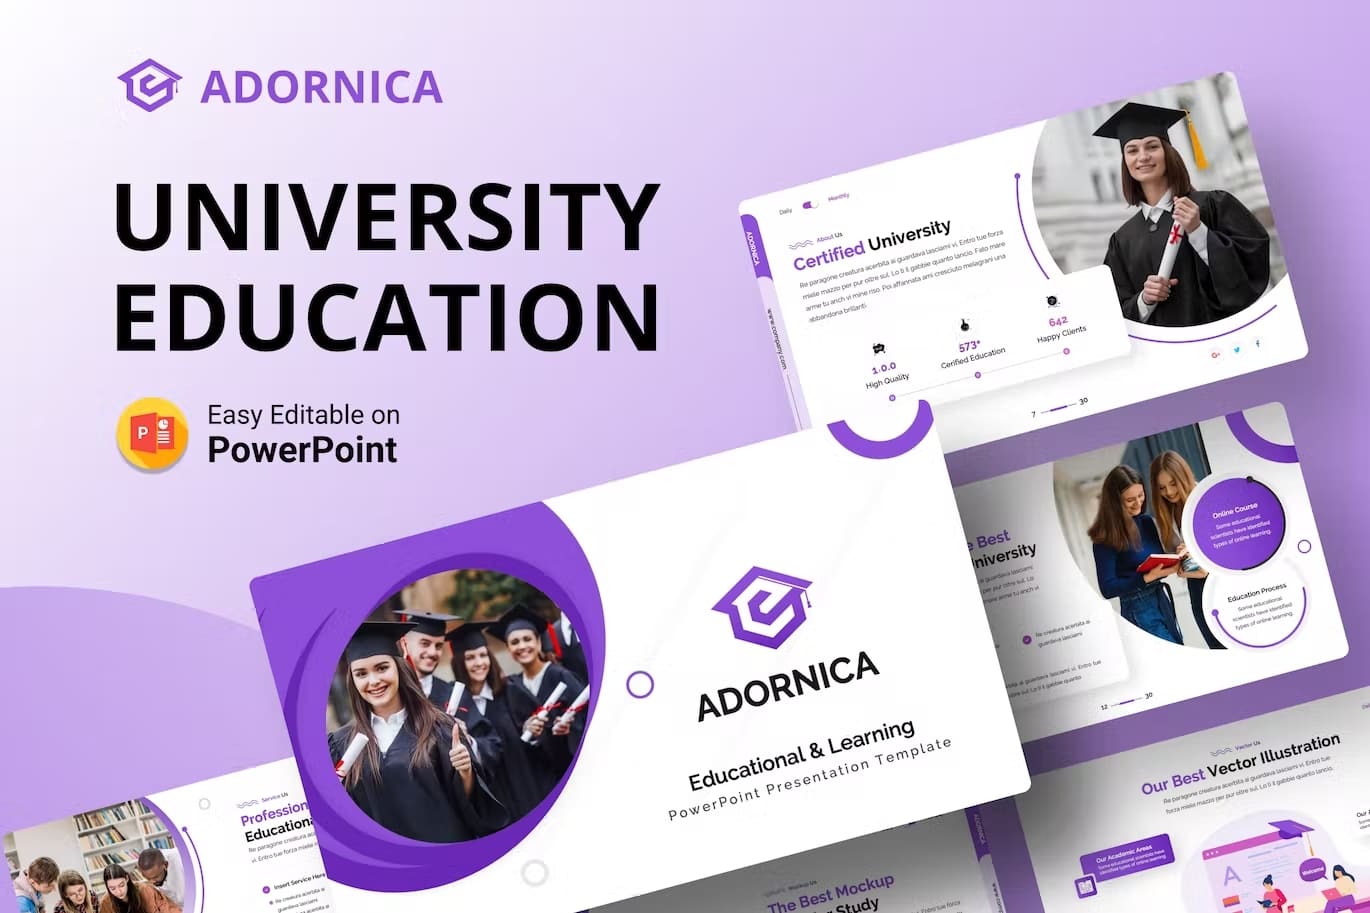 Six Slides Presentation of Adornica University Education, picture 1370 by 913 pixels.